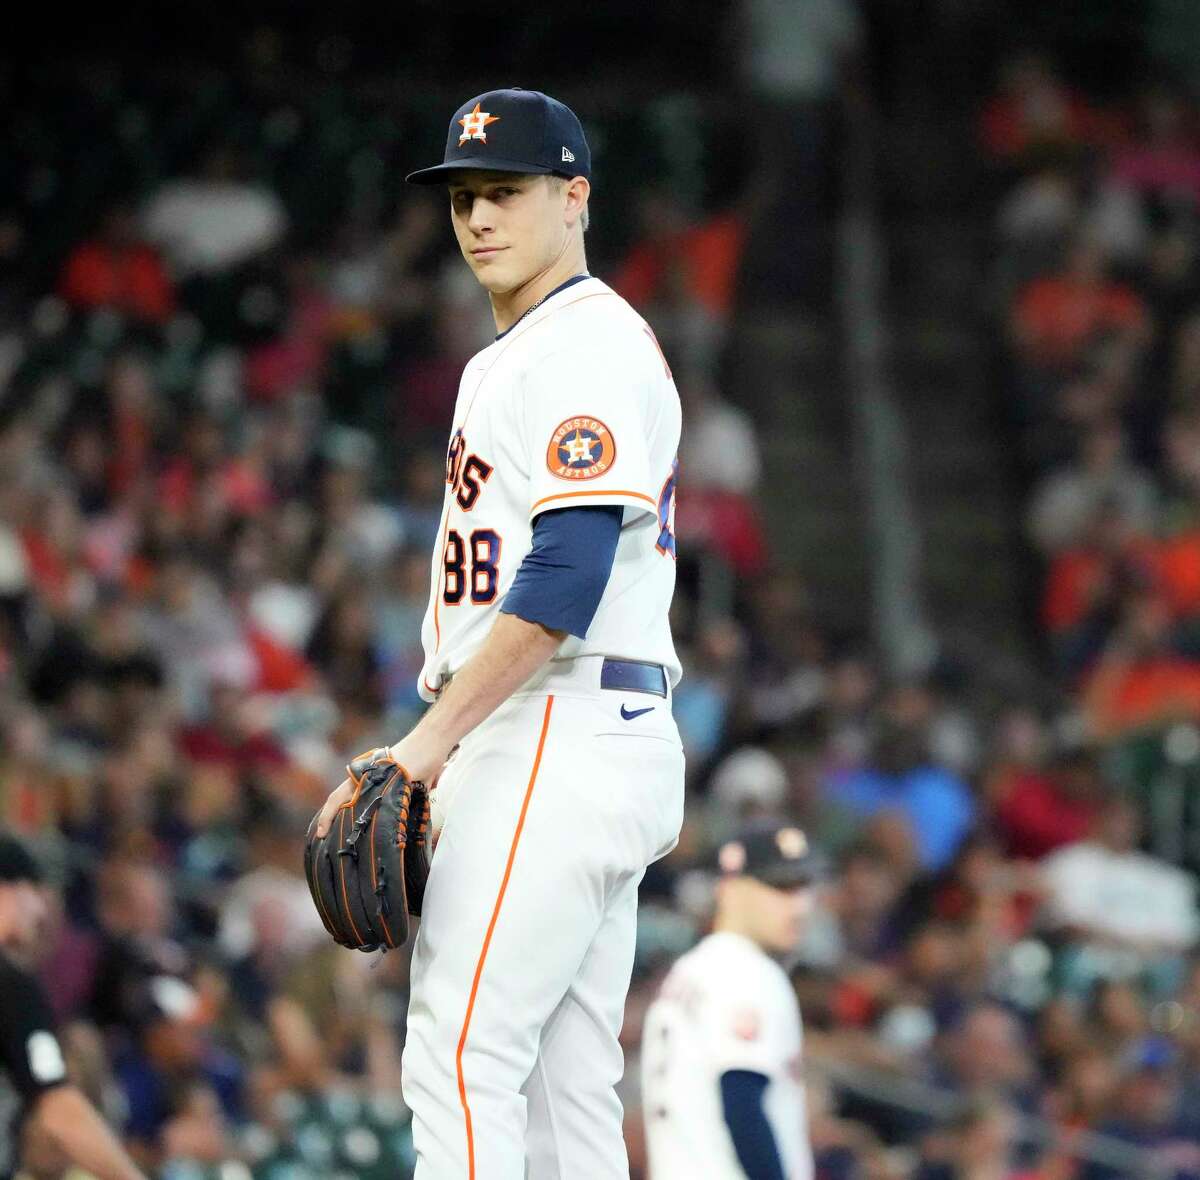 Astros, after 106-win season, are just getting started